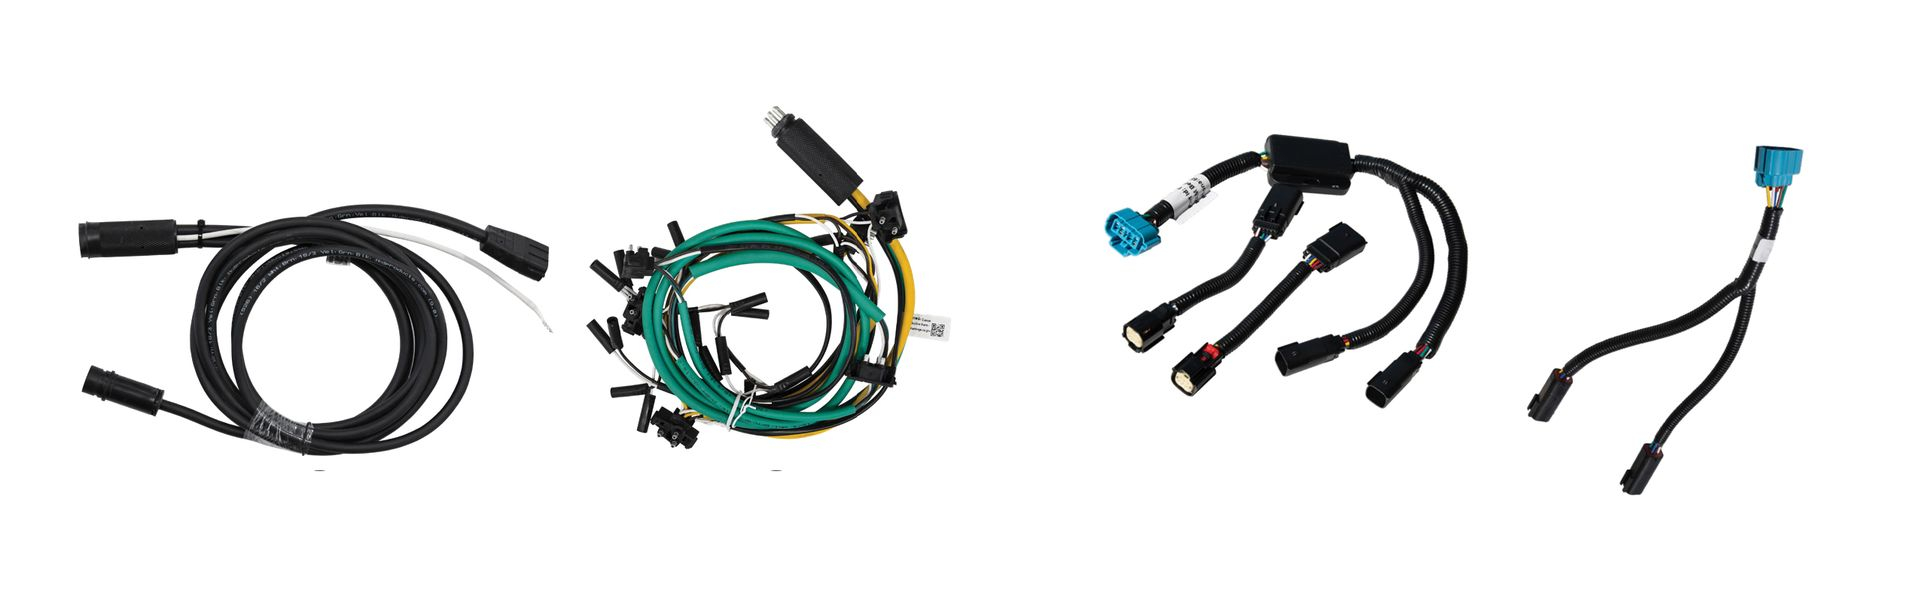 CM Truck Beds Adapters and Wiring Harnesses